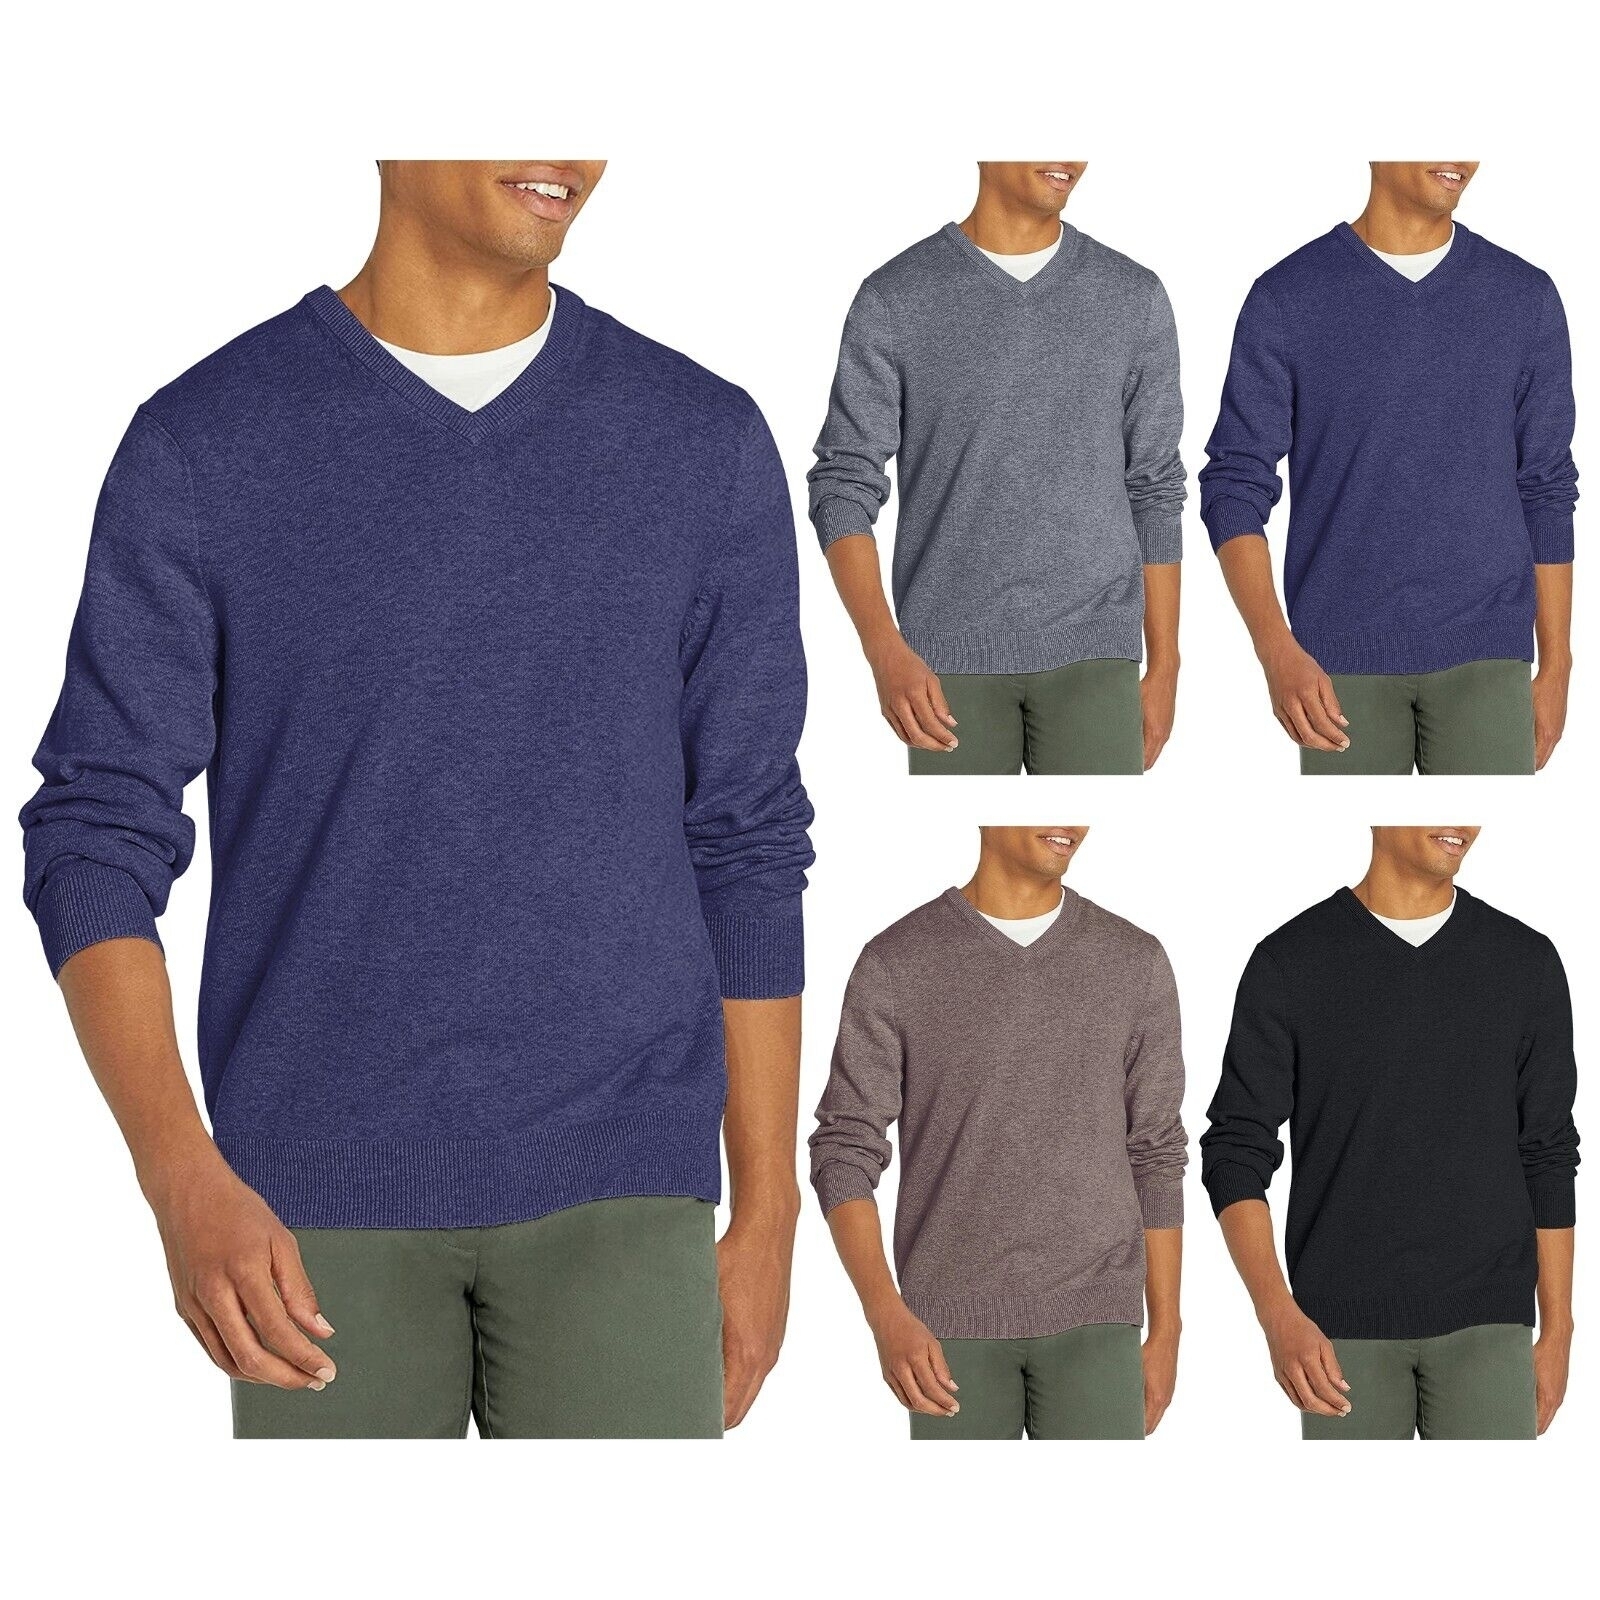 3-Pack Men's Casual Cozy Ultra Soft Slim Fit Warm Knit Pullover V-Neck Sweater - Small